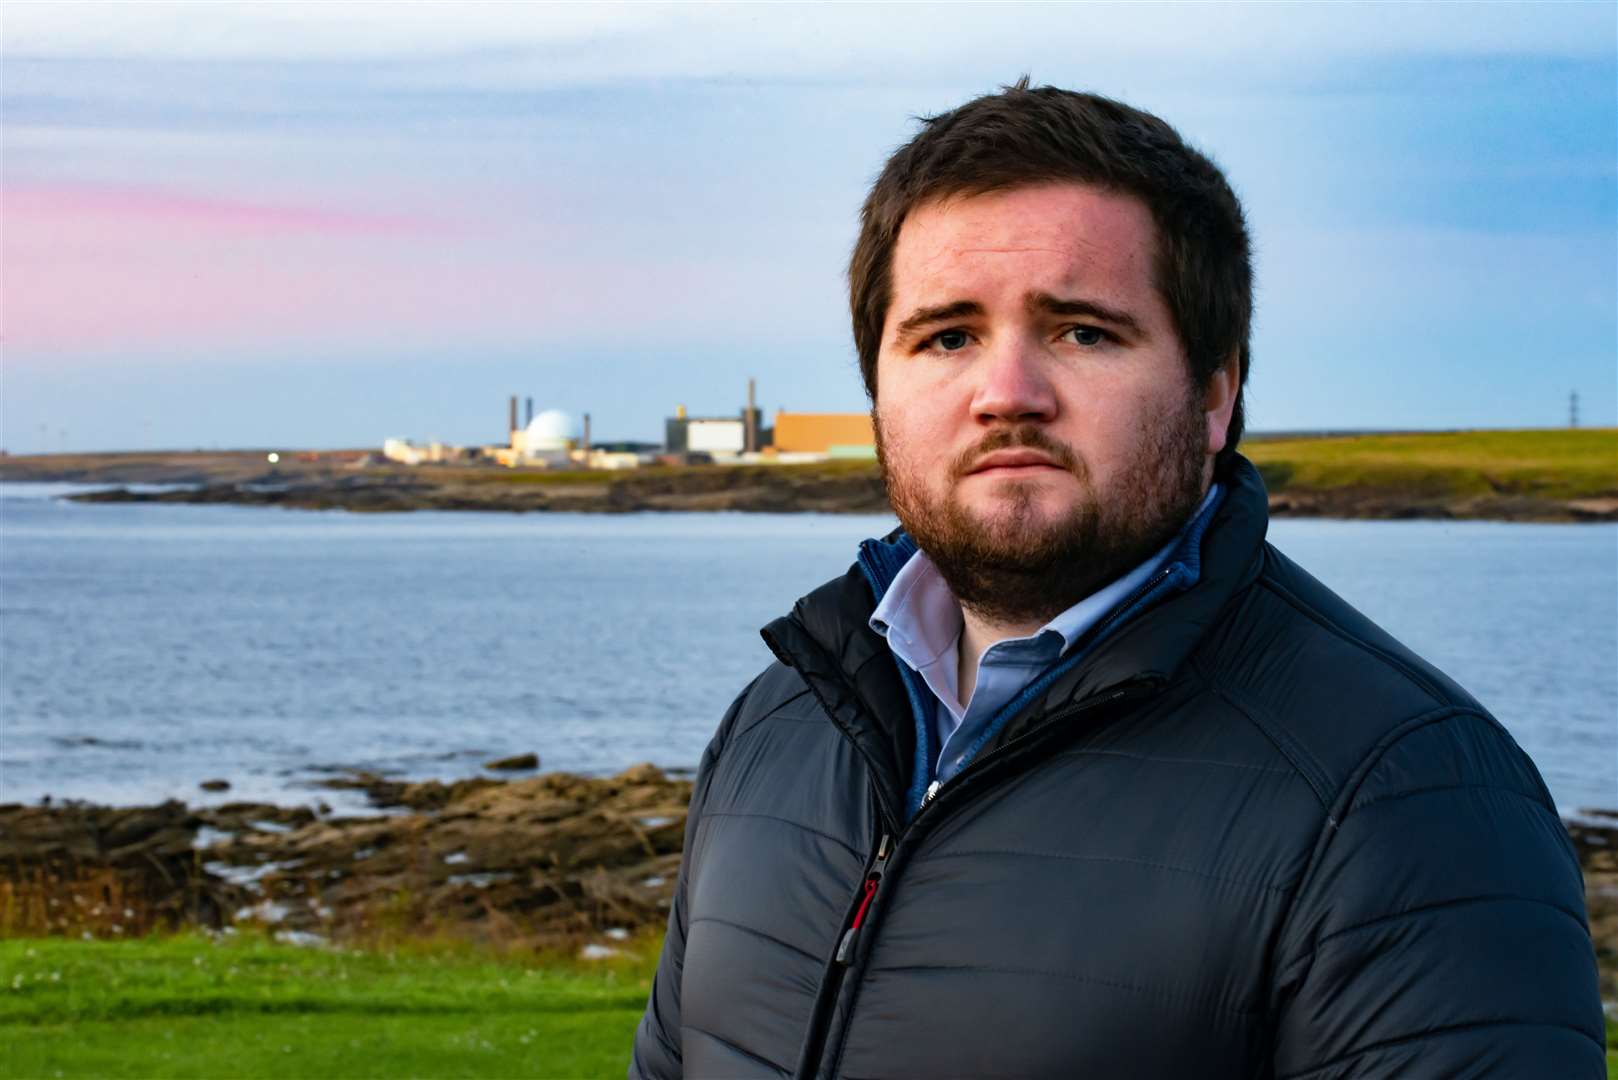 Thurso and West Caithness councillor Struan Mackie said there was overwhelming local support for development of the area's nuclear sites.